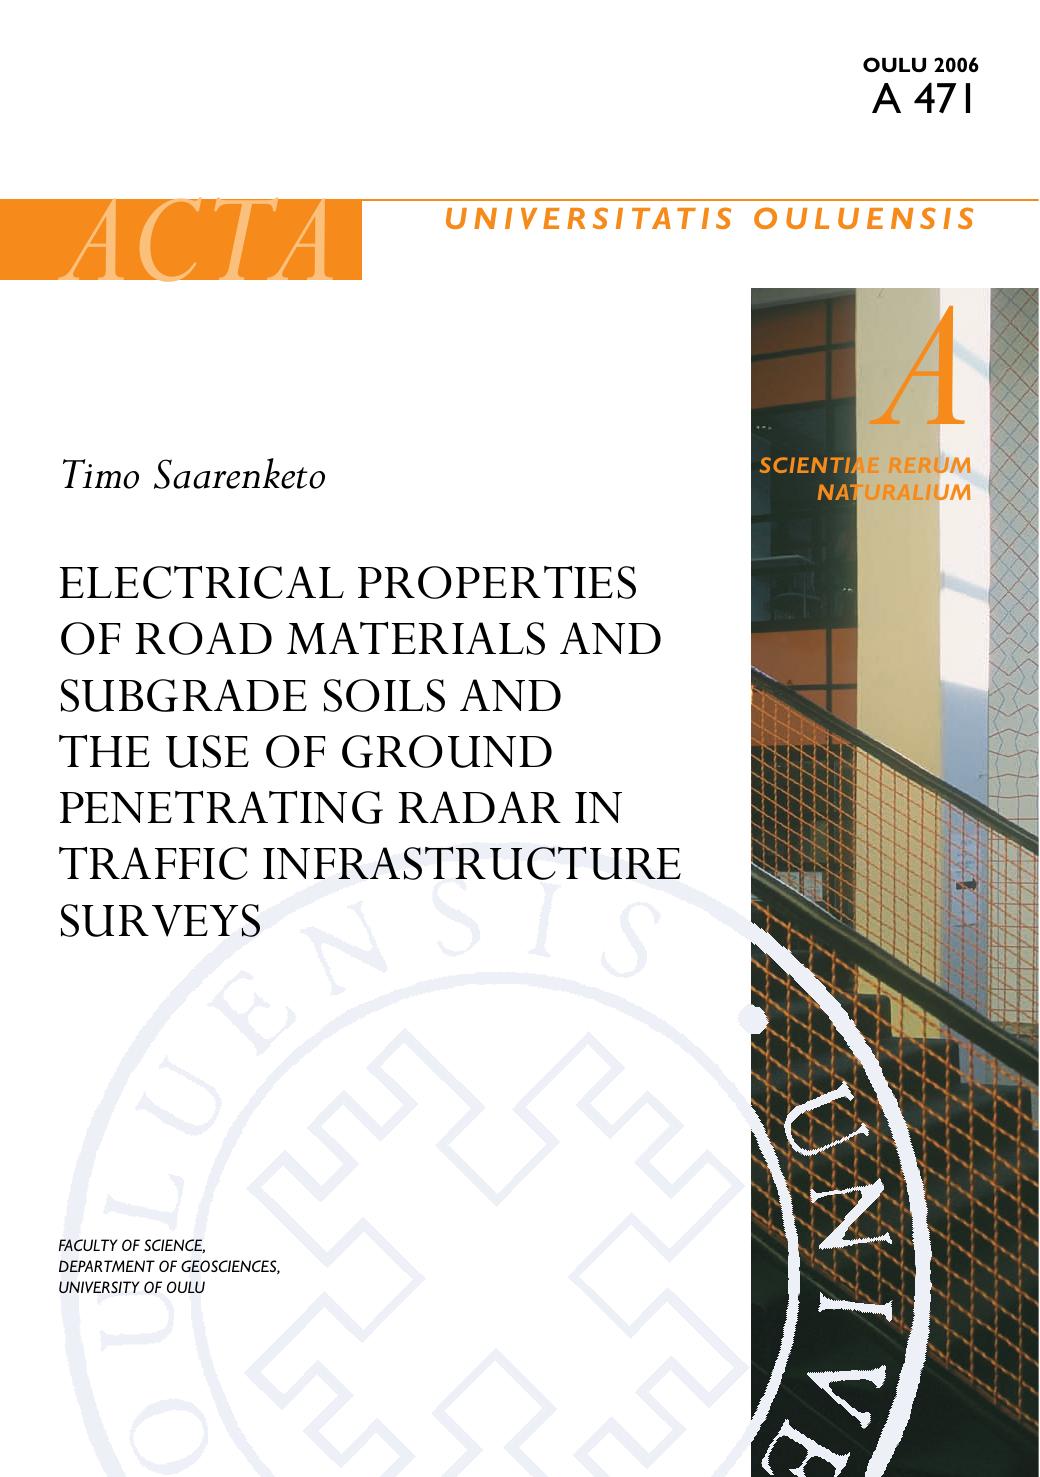 Electrical properties of road materials and subgrade soils and the use of Ground Penetrating Radar in traffic infrastructure surveys